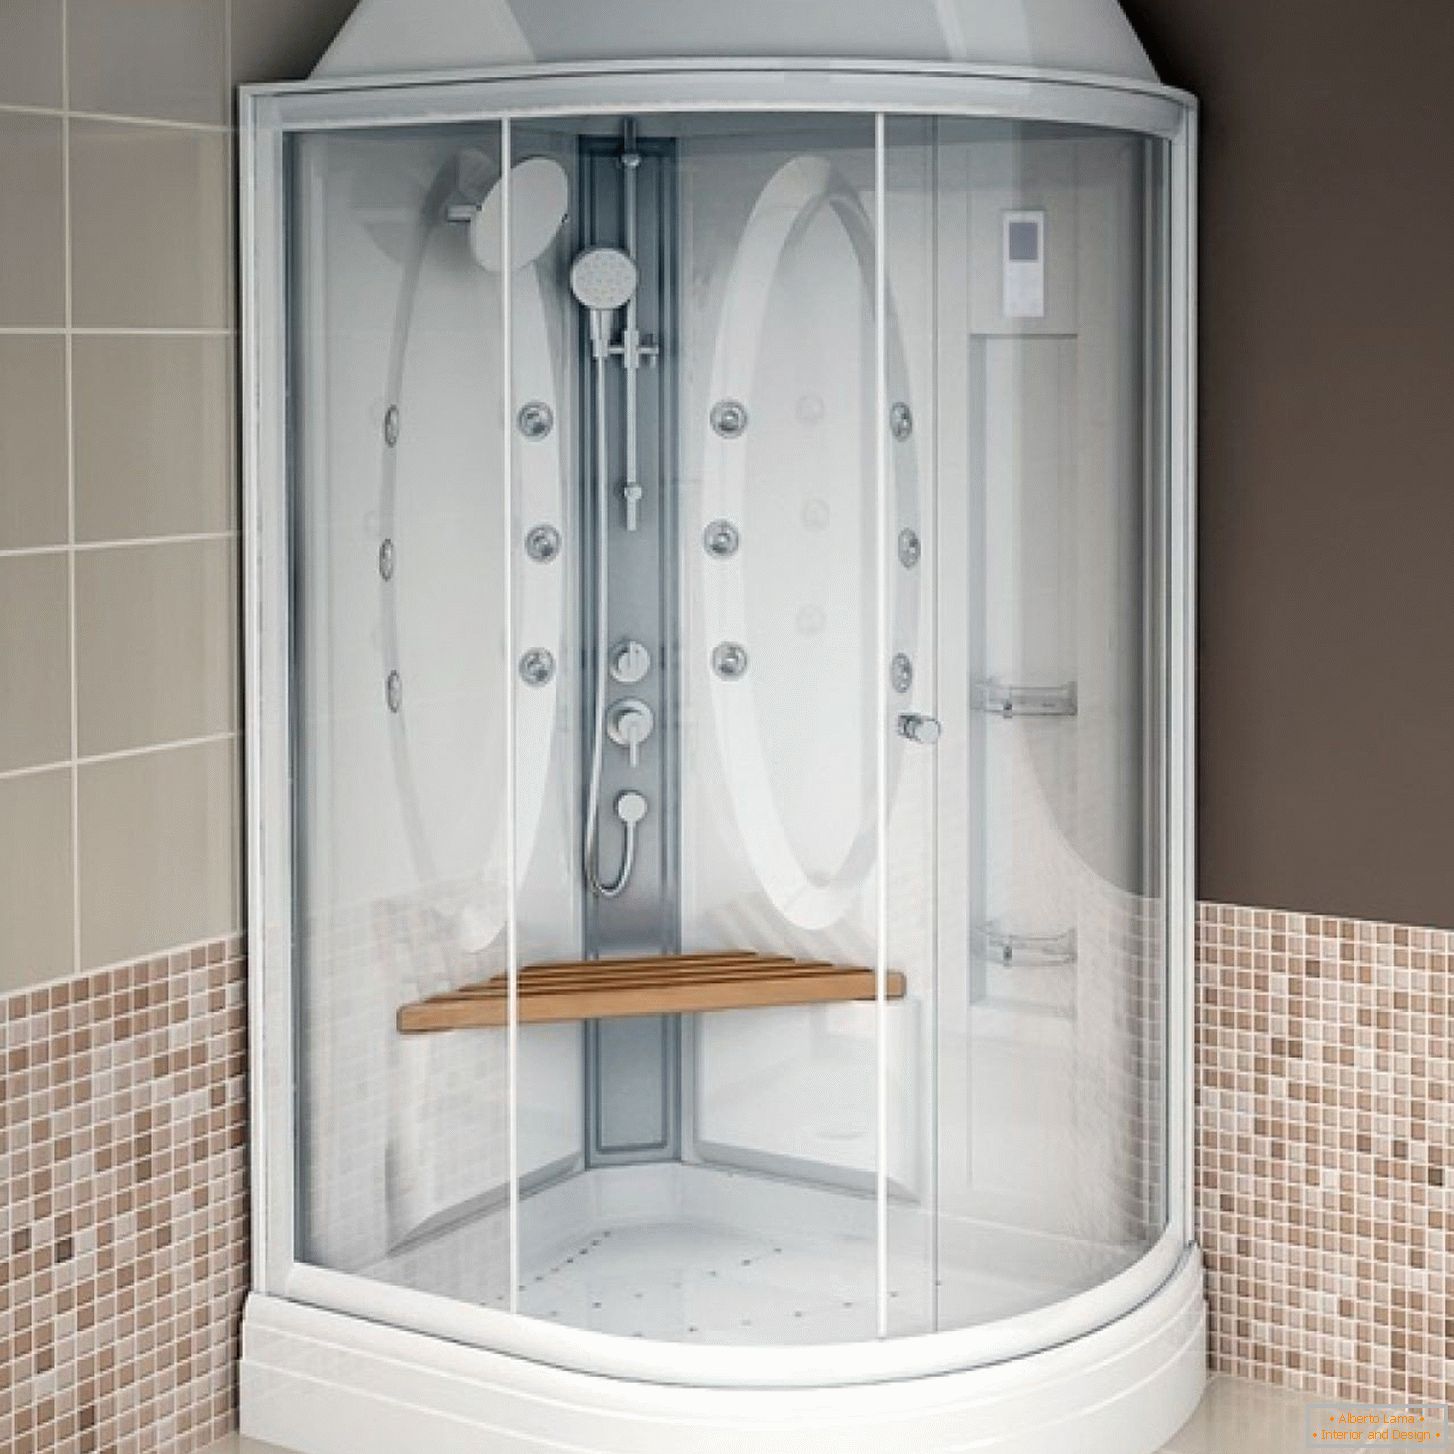 Shower cabin with seat